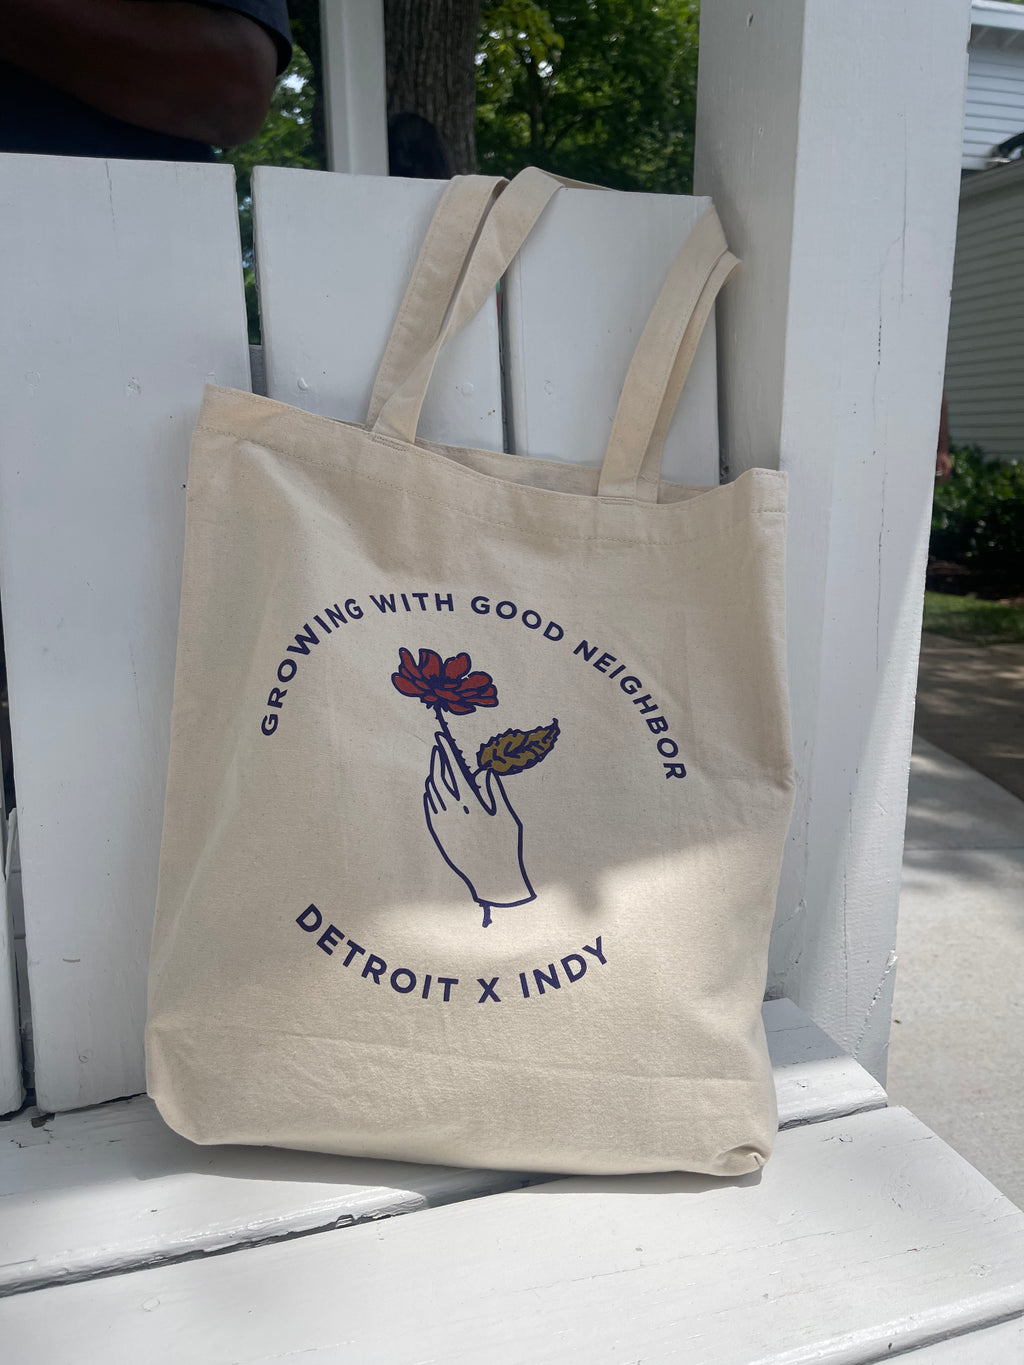 The Give-Back Bag